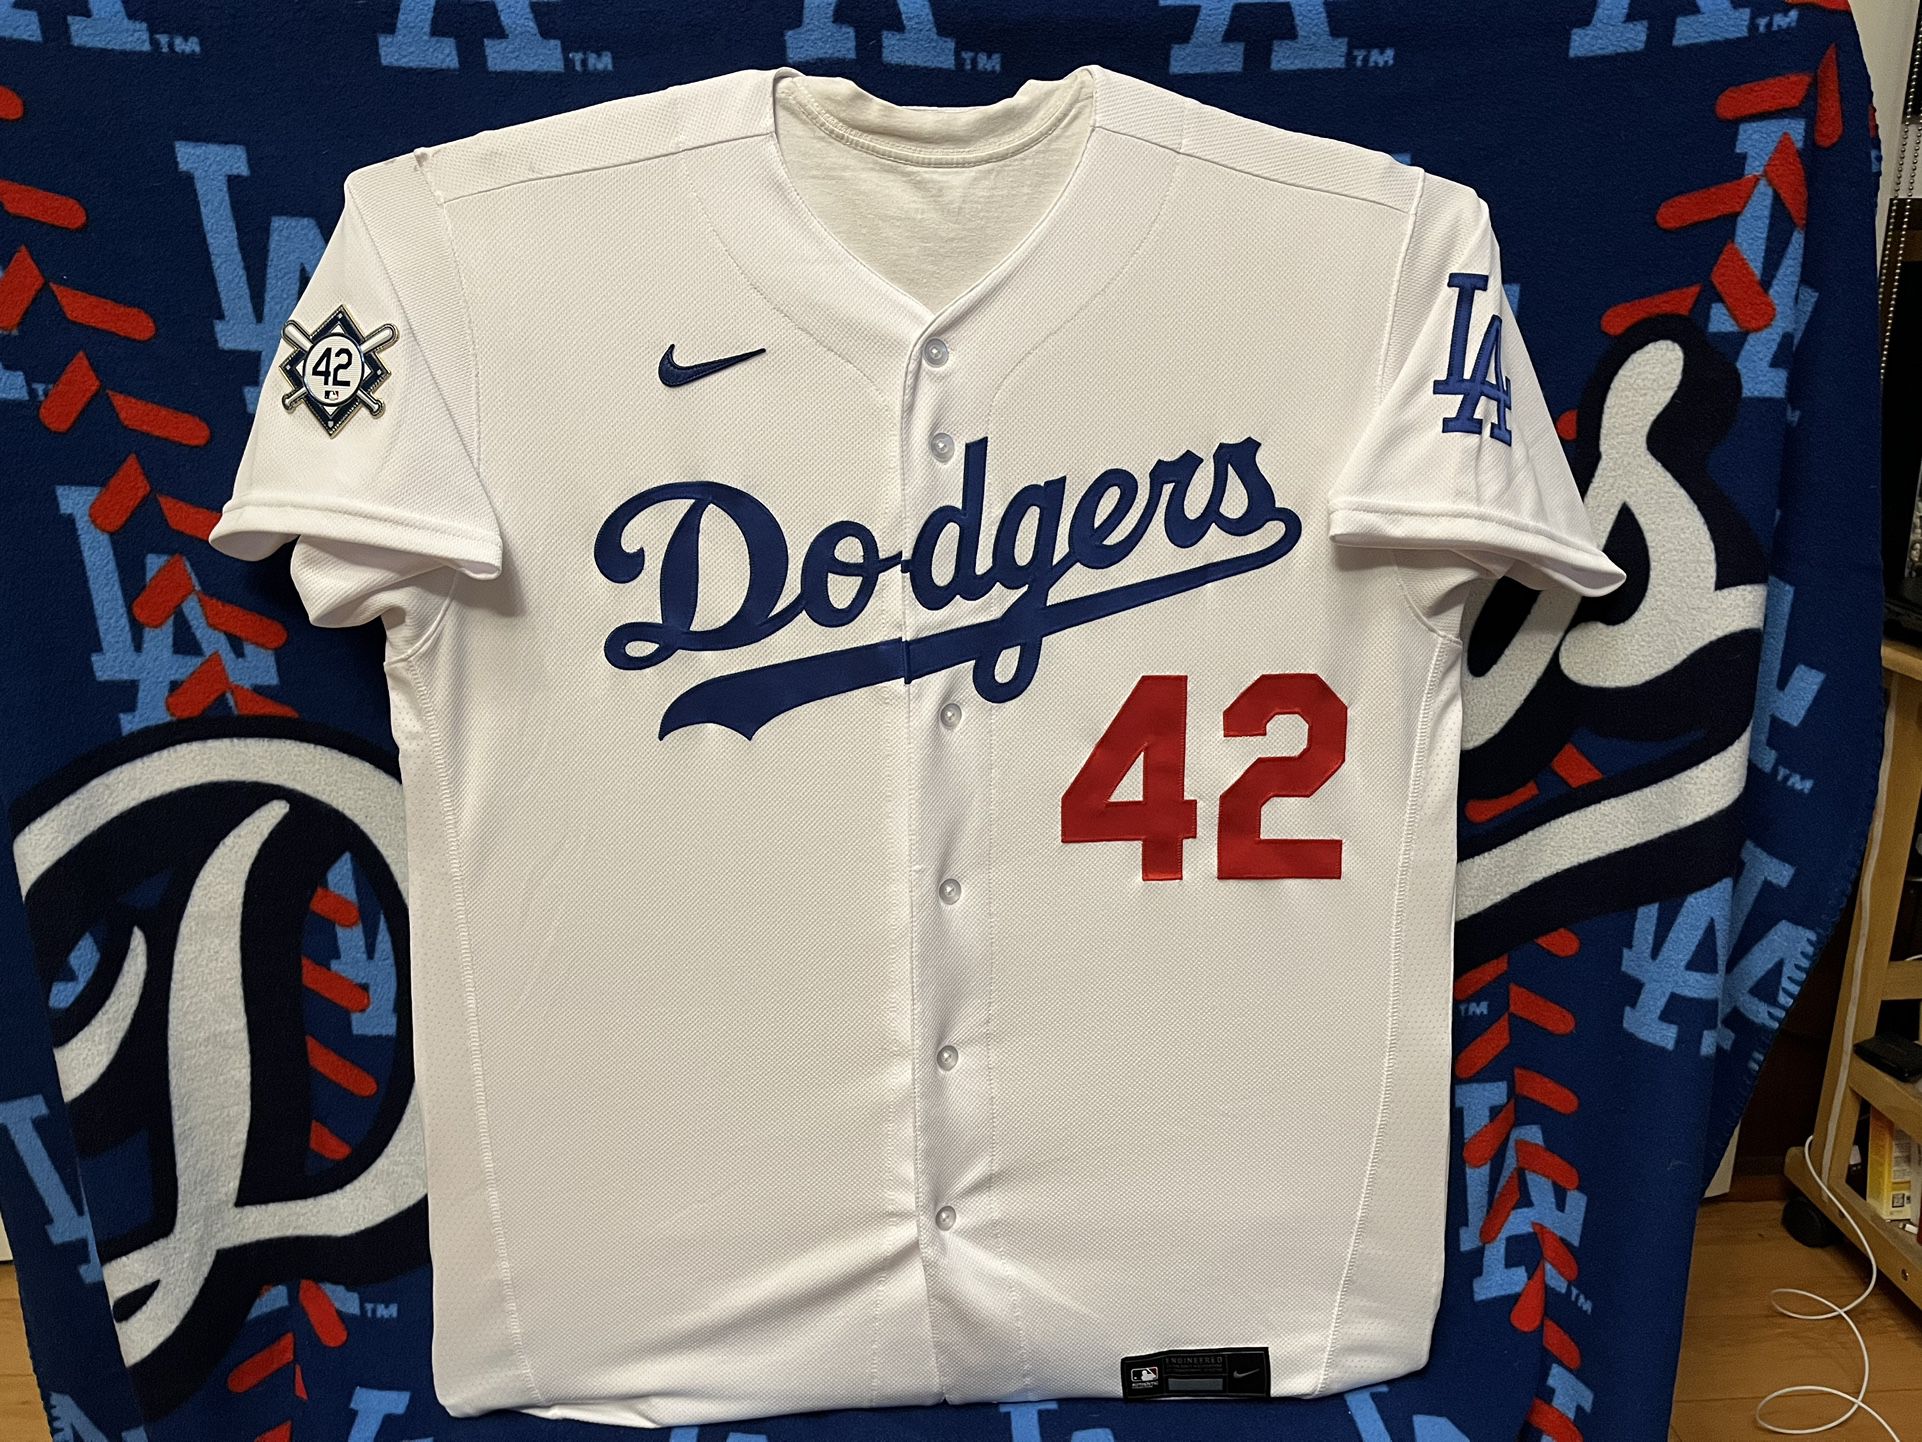 DODGERS ORIGINAL JACKIE ROBINSON JERSEY for Sale in Los Angeles, CA -  OfferUp